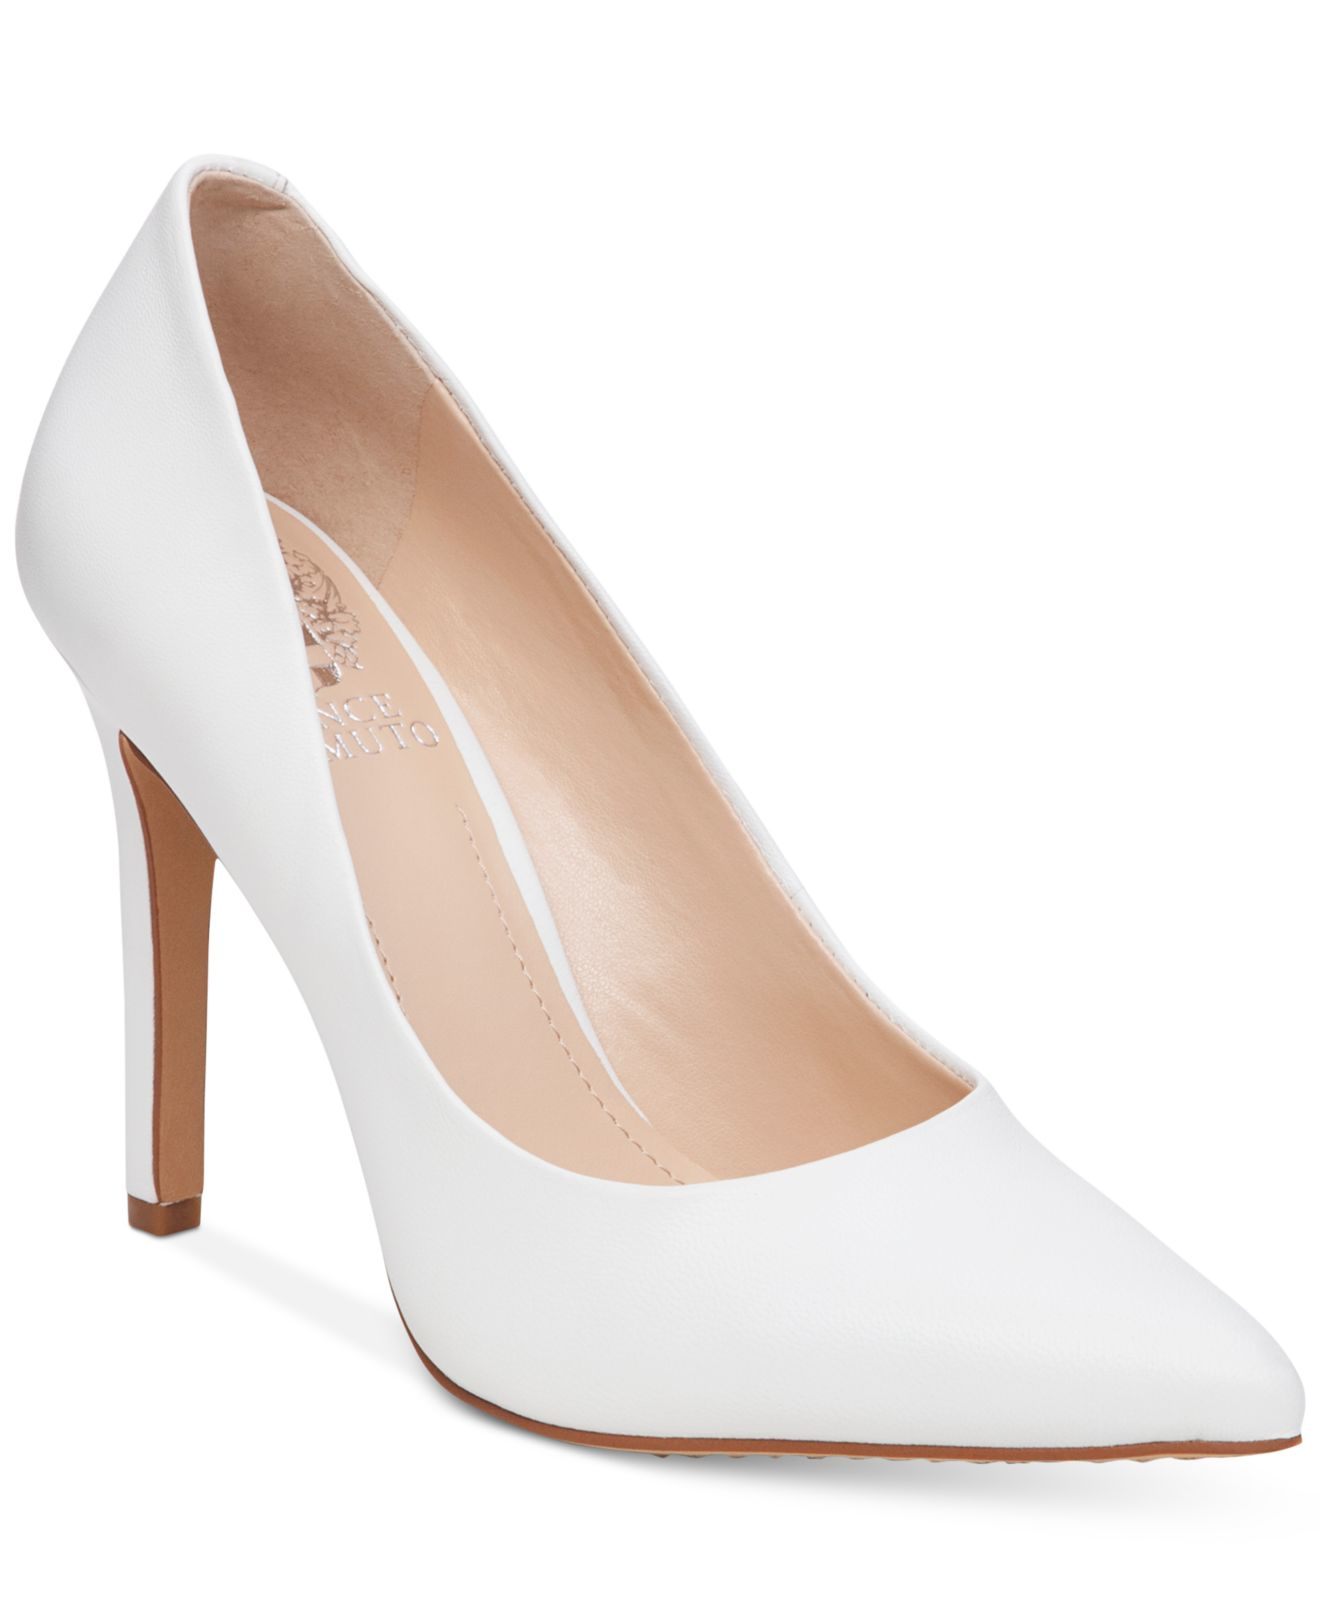 Lyst - Vince Camuto Kain Pointed Toe Mid Heel Pumps in White